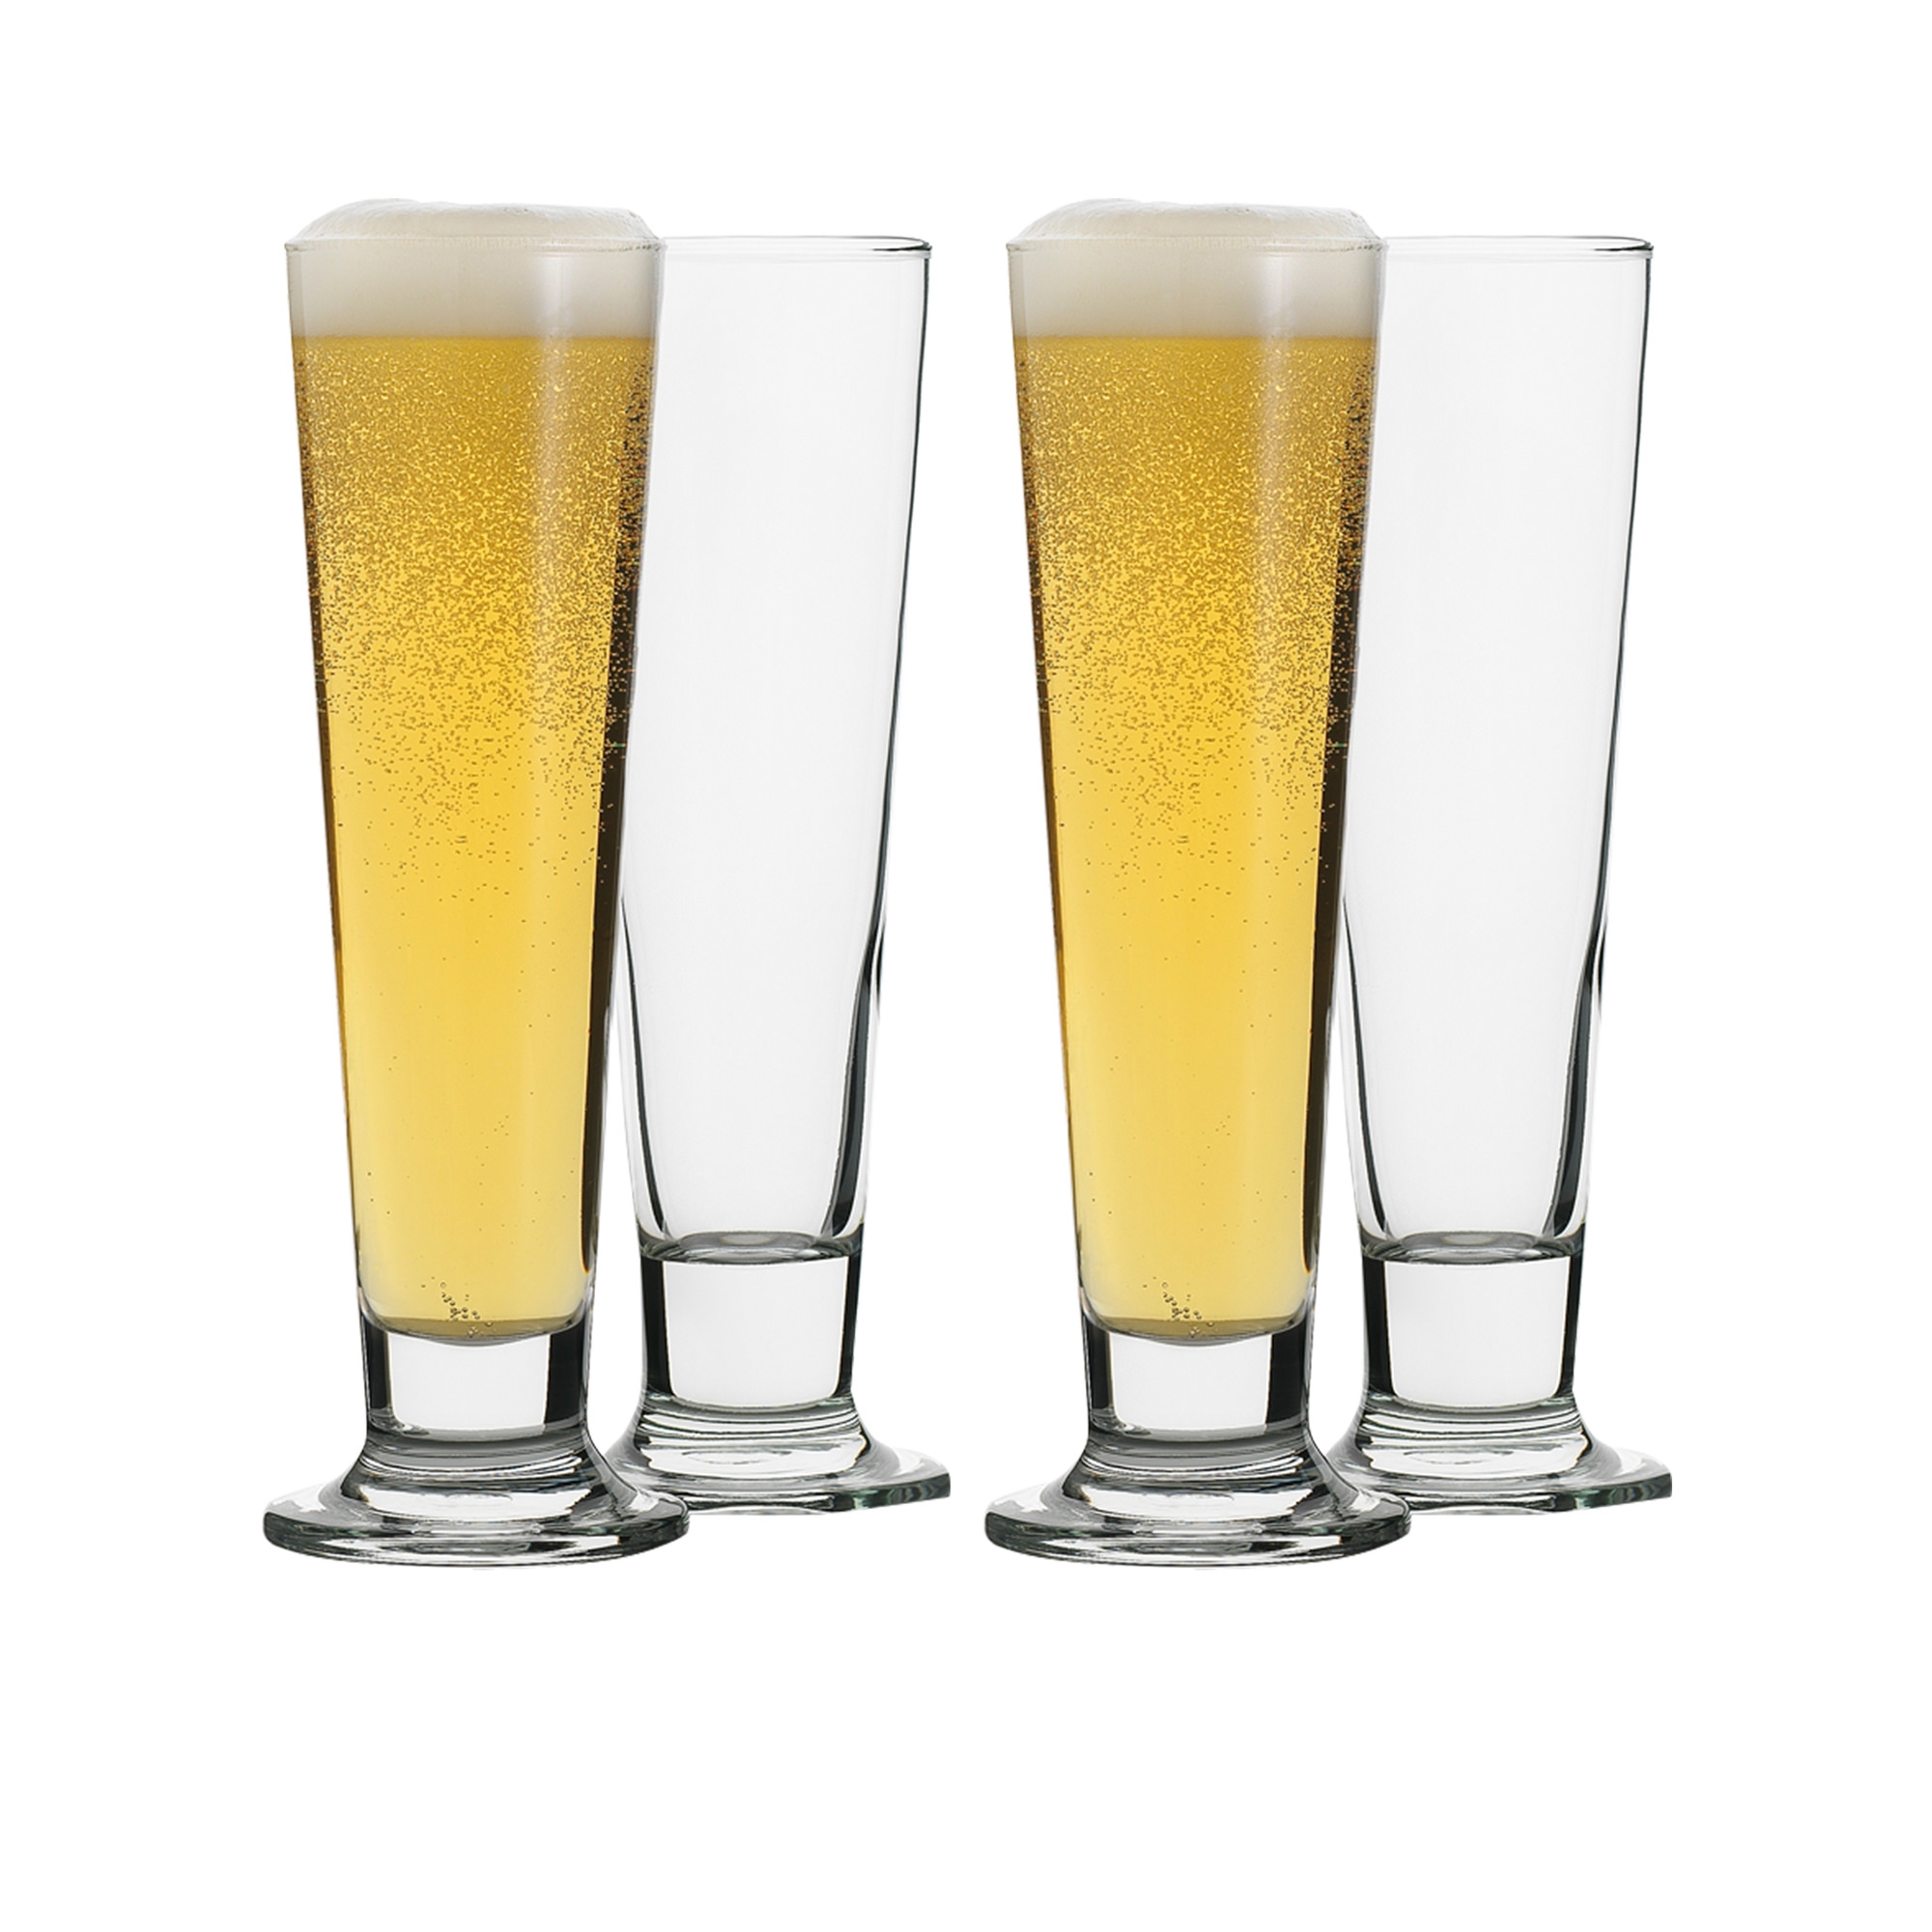 Ecology Classic Pilsner Glass 420ml Set of 4 Image 1